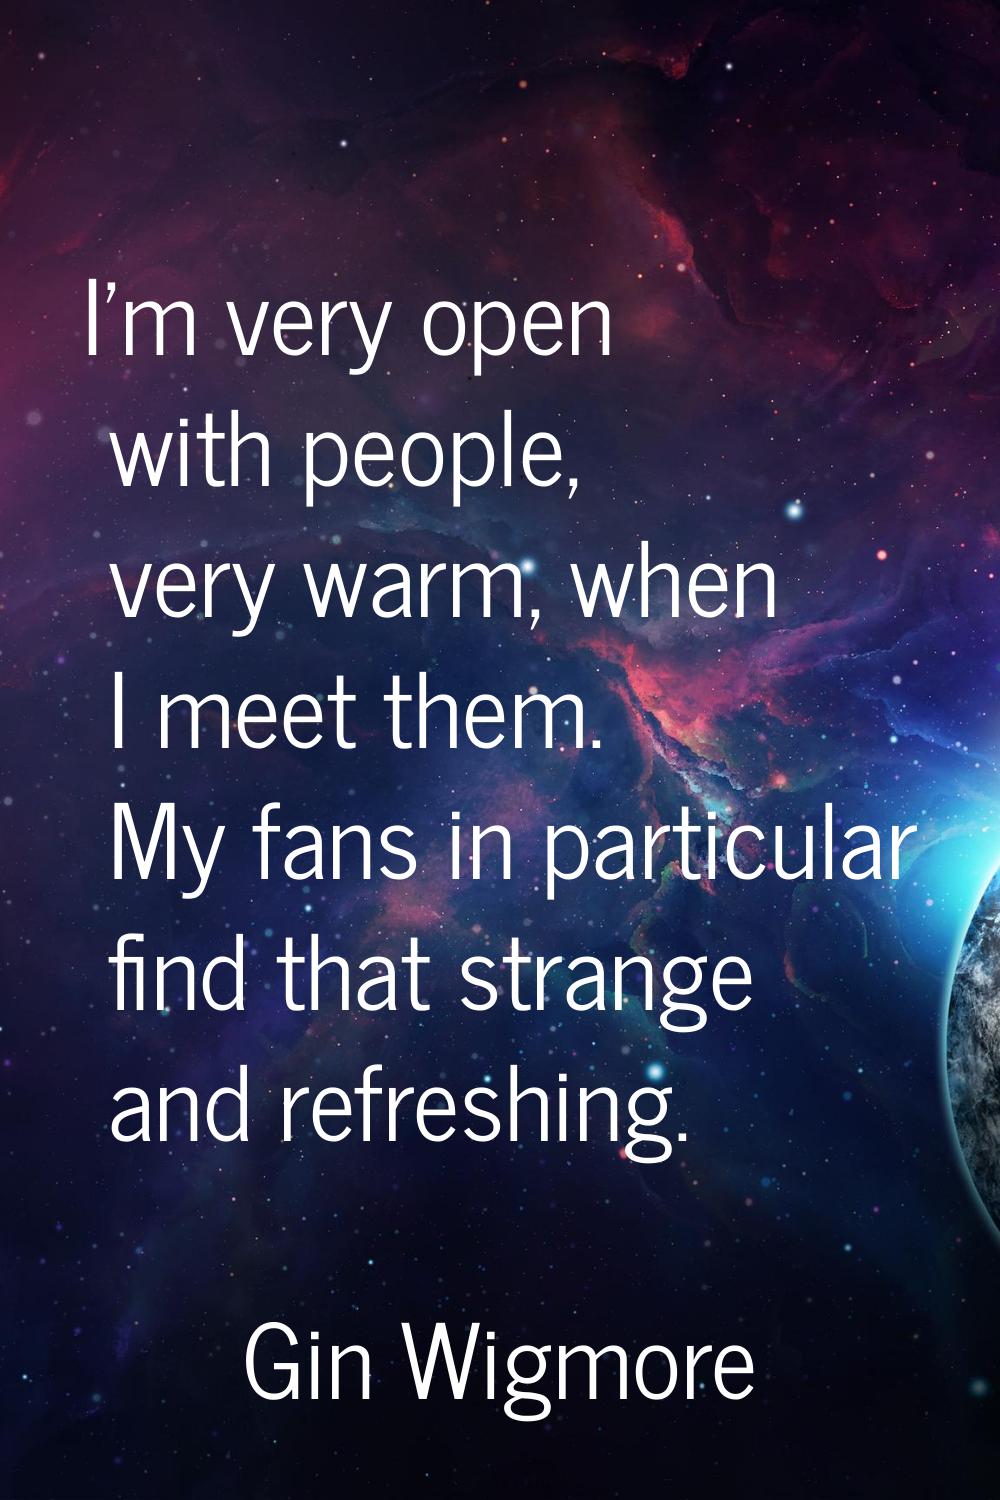 I'm very open with people, very warm, when I meet them. My fans in particular find that strange and